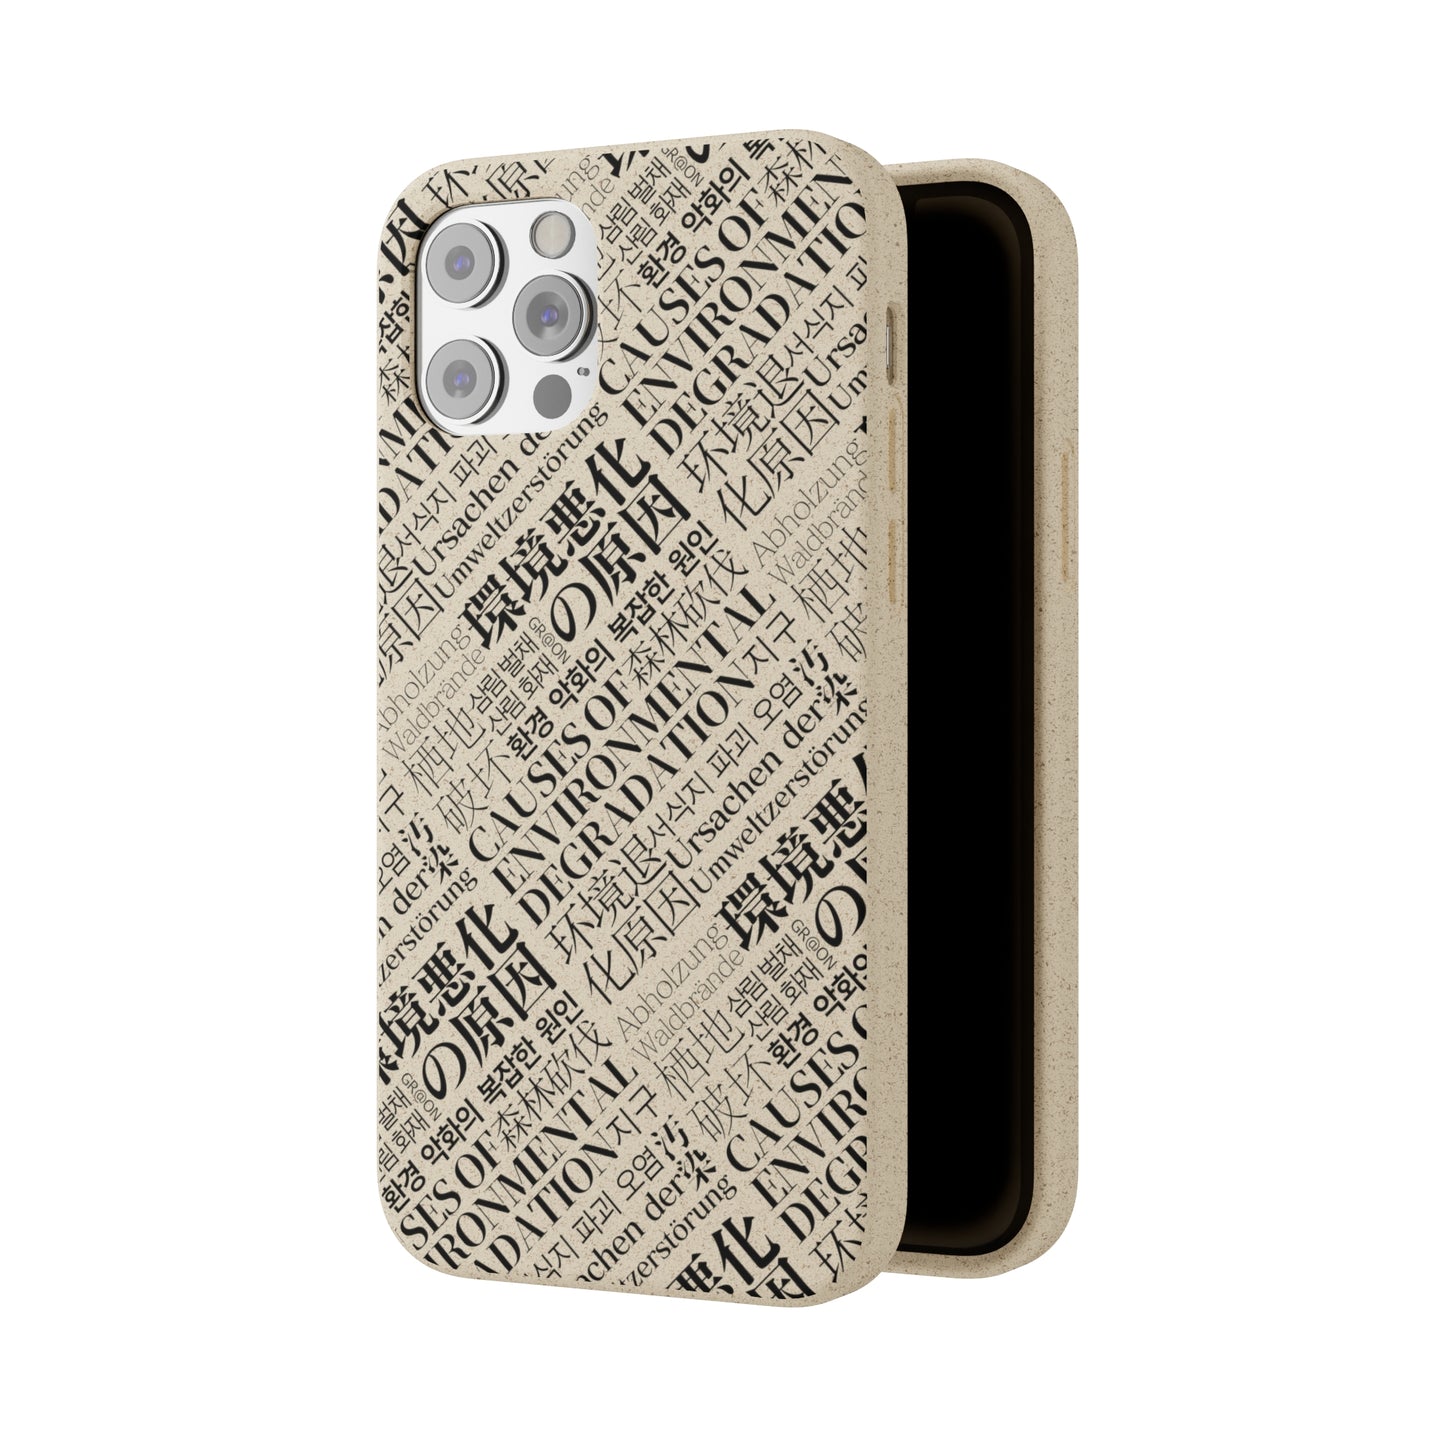 Eco-Friendly - Biodegradable Cases suitable for iphone - Causes of Environmental Degradation